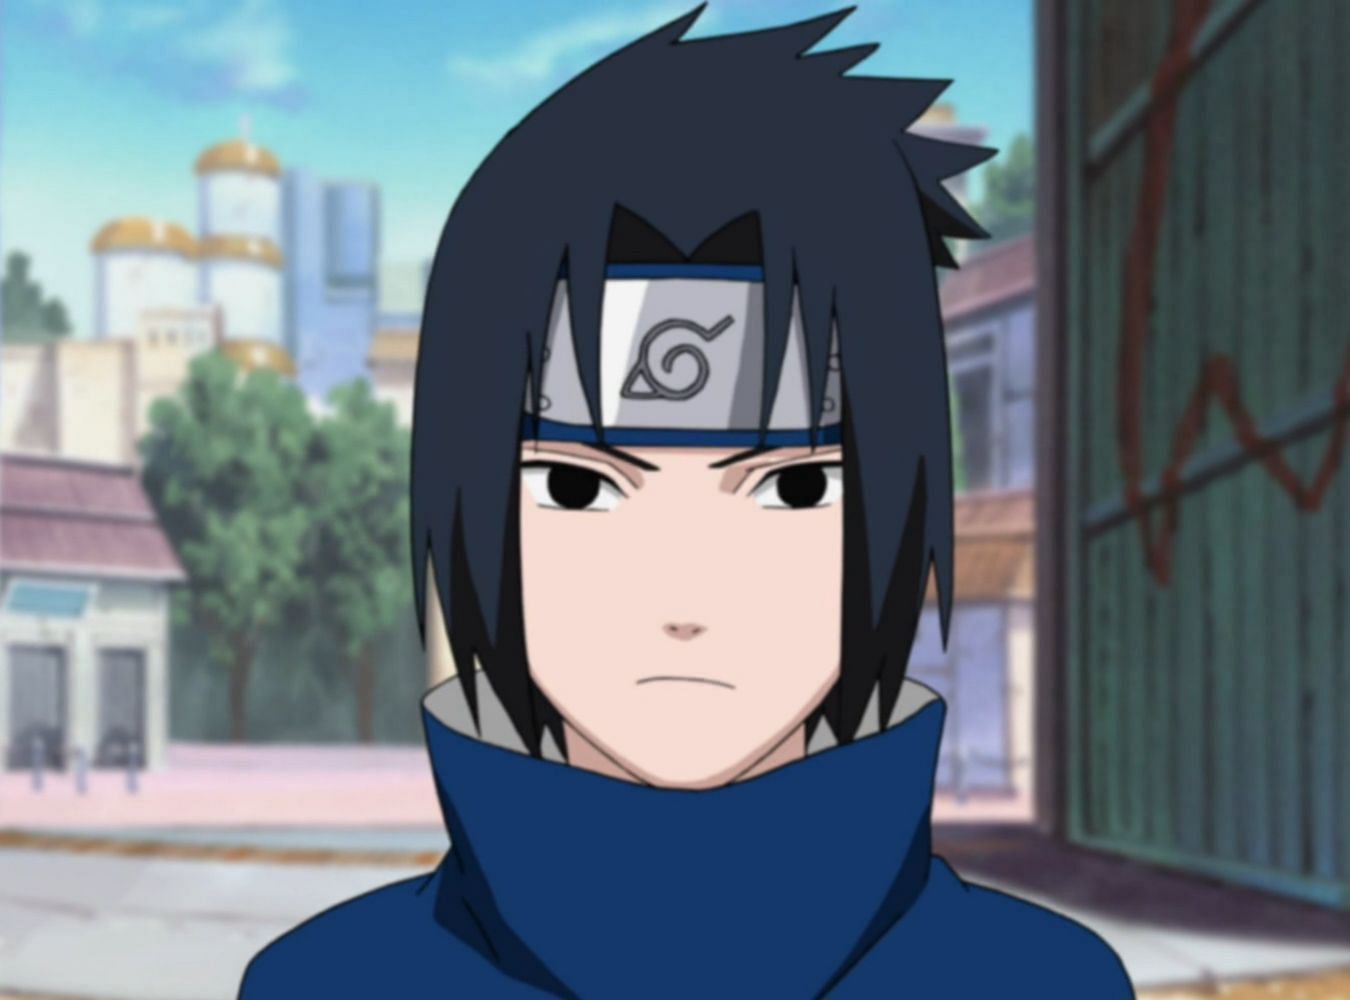 Sasuke might have become good later on, but he was definitely a very confused character earlier in the series (Image via Naruto)